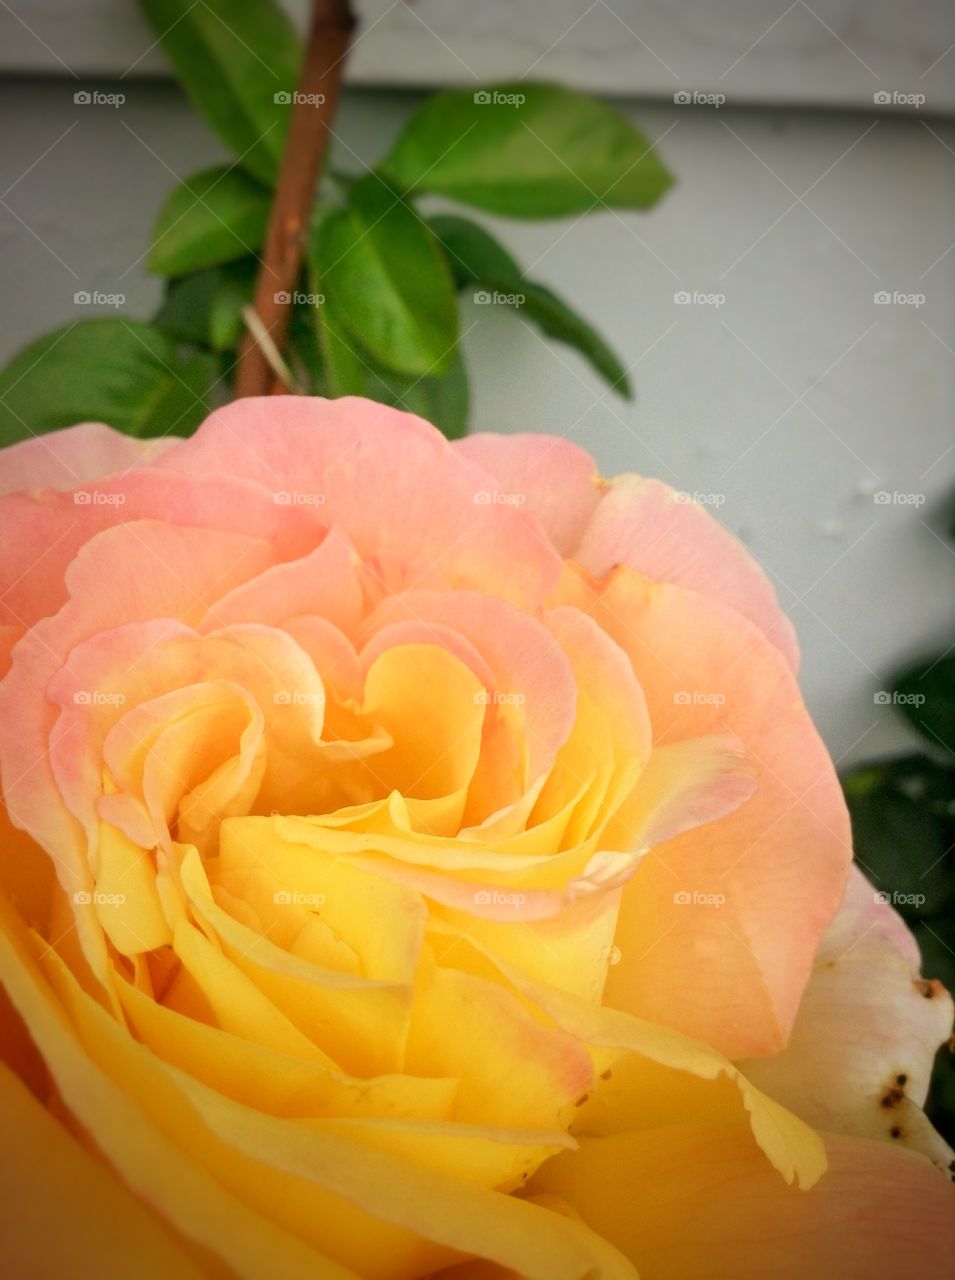 Natures beauty. A yellow rose with a hint of orange.